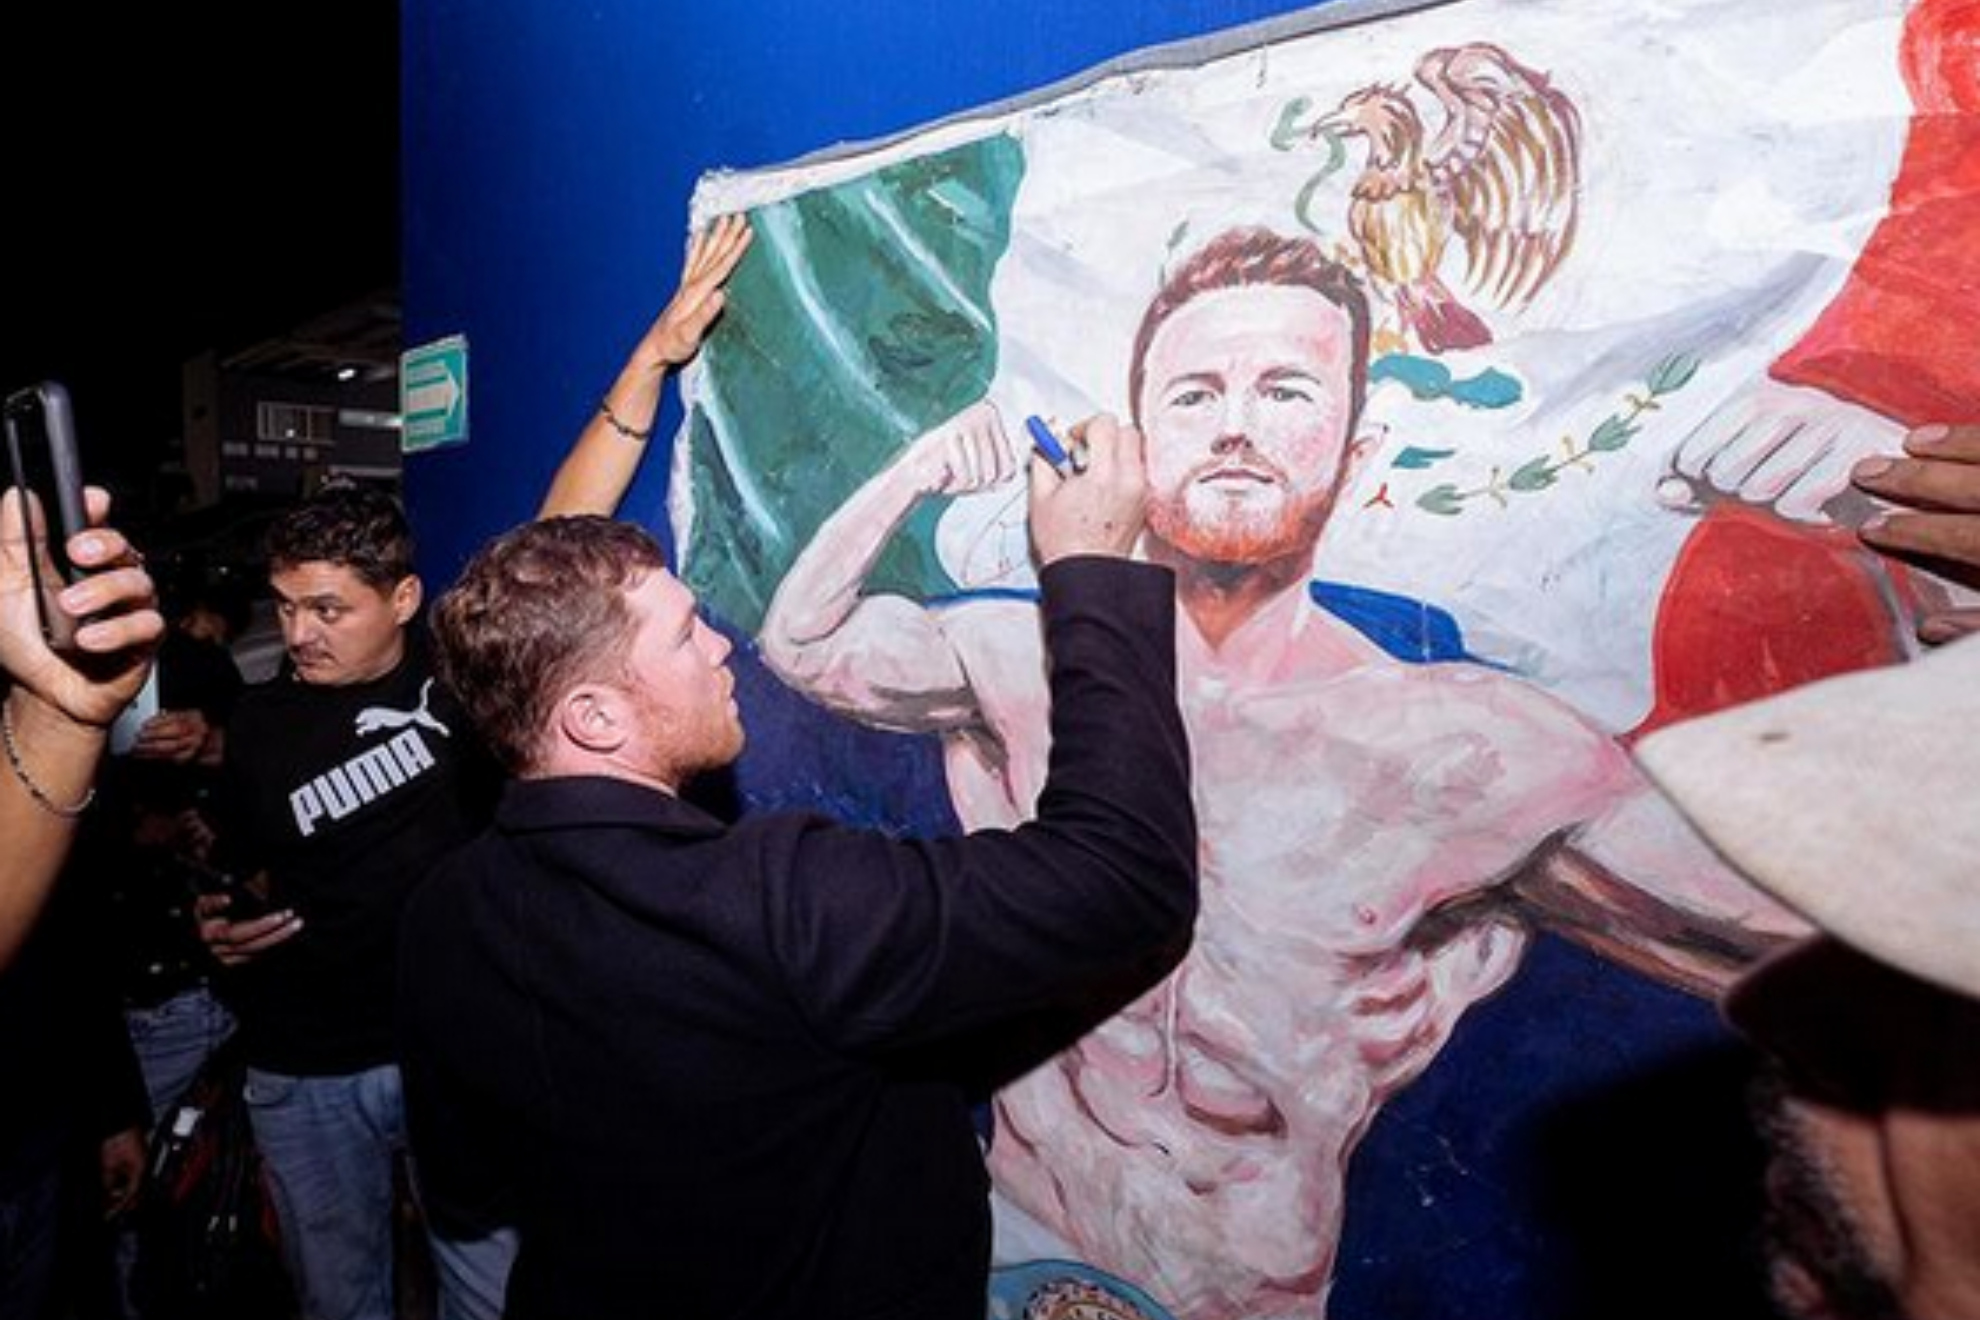 Saul "Canelo" Alvarez signs a portrait of him with a Mexican flag in the background.